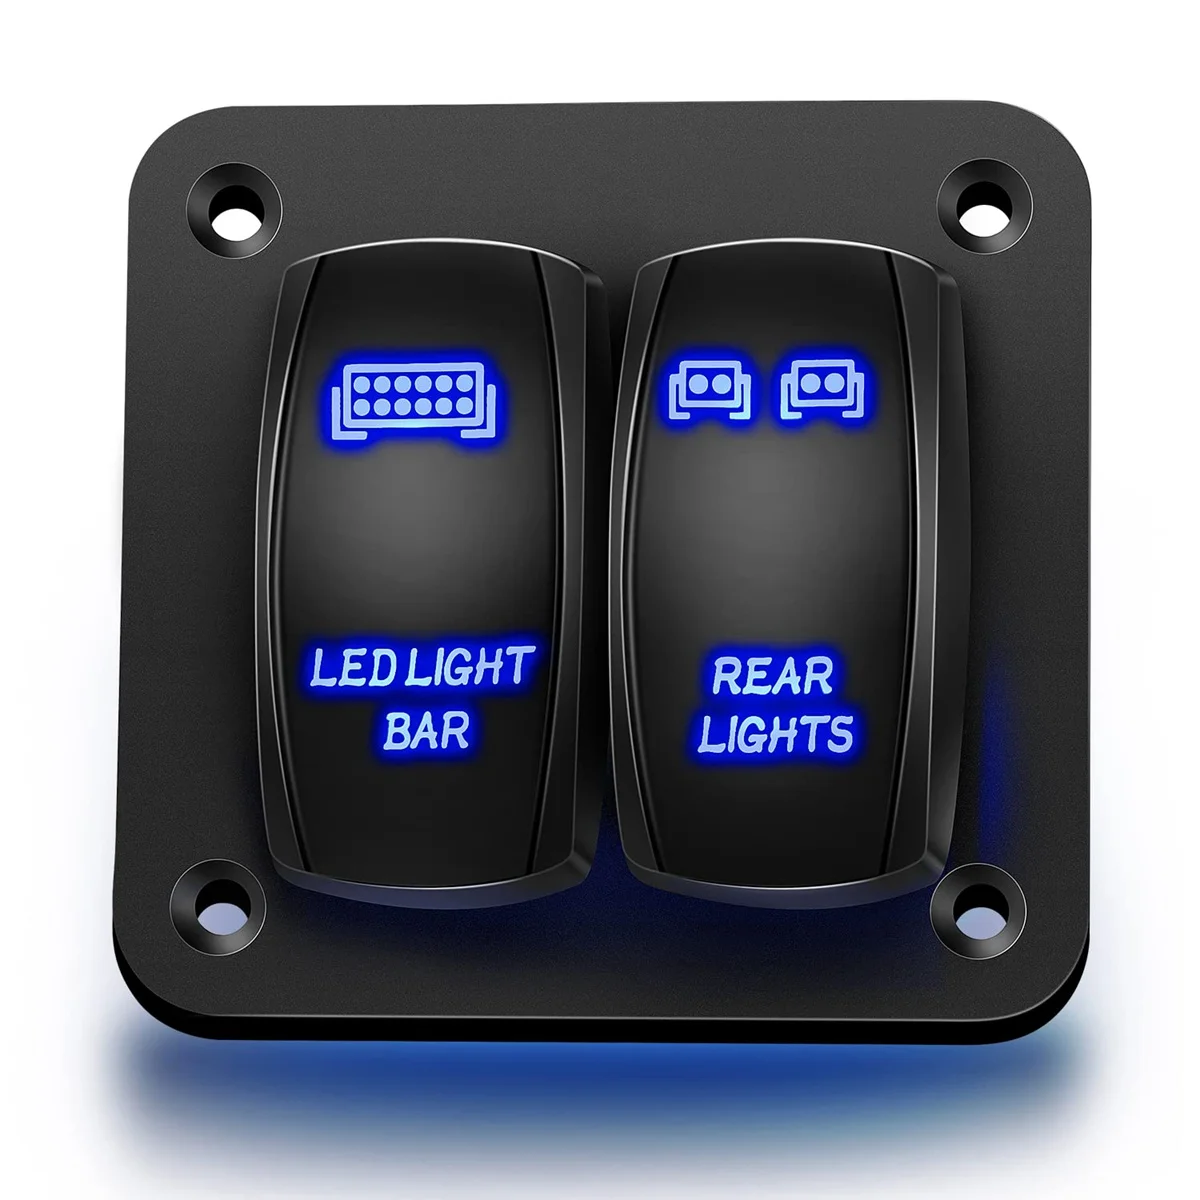 

2 Gang Rocker Switch Panel Light Toggle Circuit Breaker Protector LED Switch for Car Auto Truck Caravan Marine Blue